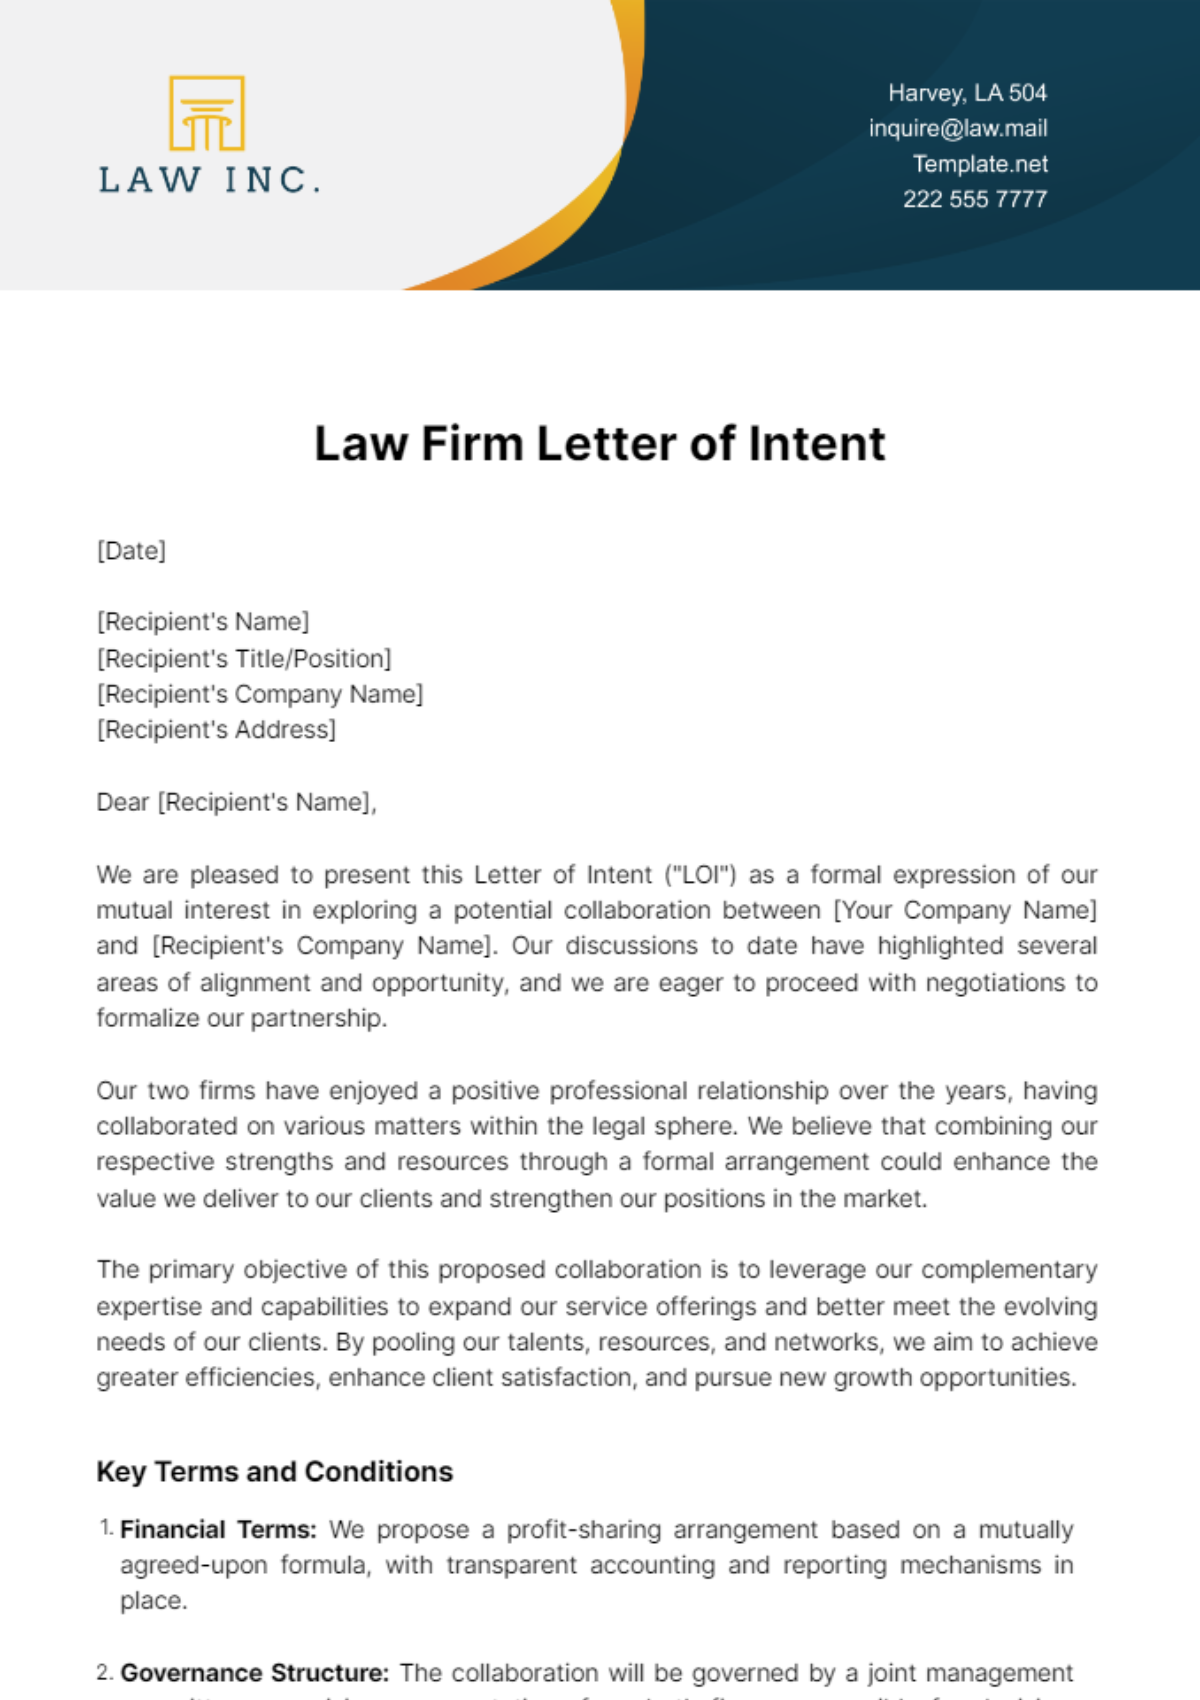 Free Law Firm Letter of Intent Template